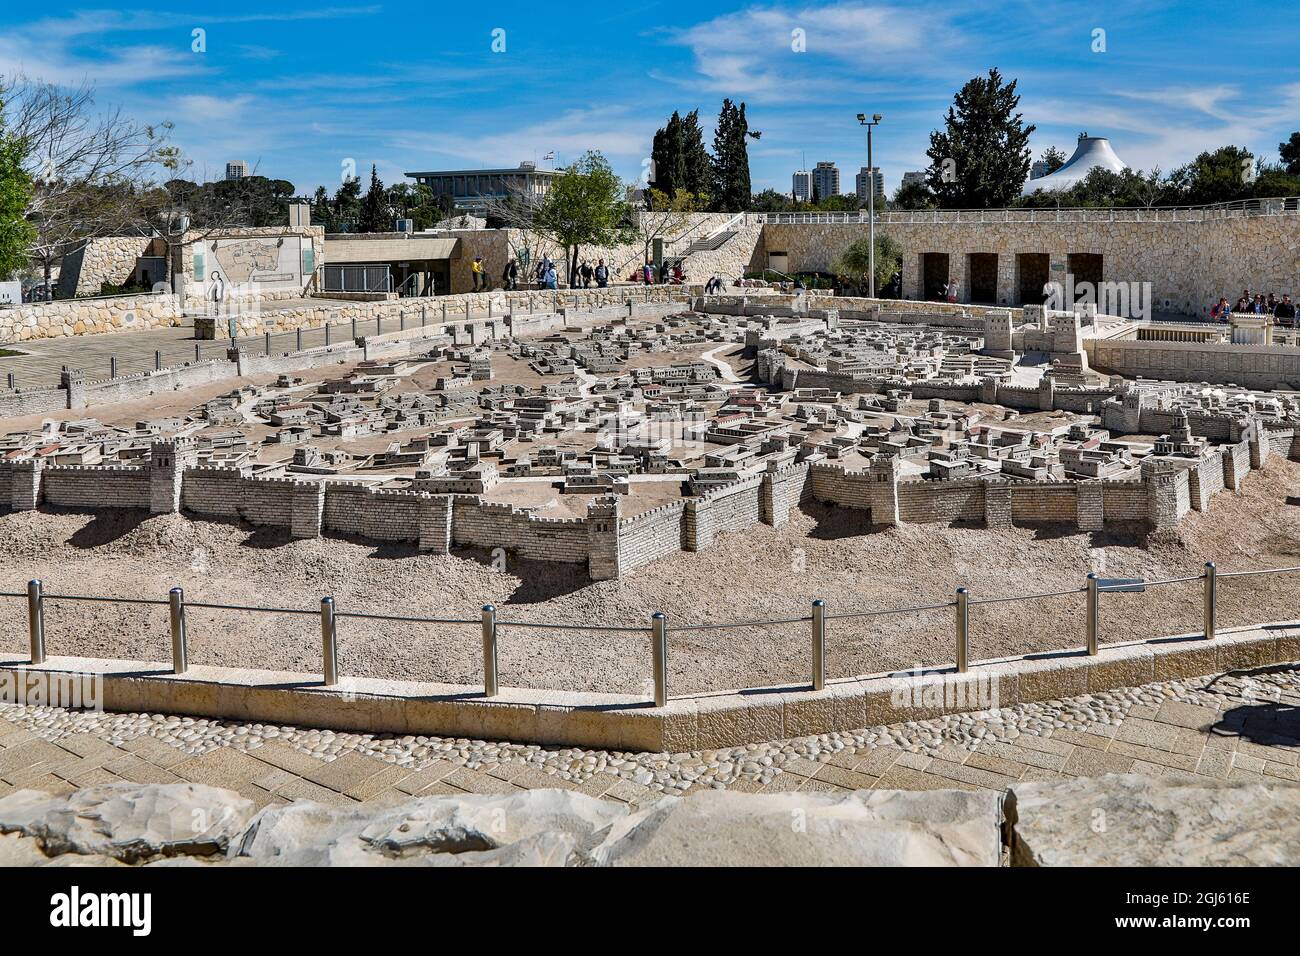 Israel, Jerusalem. Israeli Museum, Holyland Model of the ancient walled city of Jerusalem in the late Second Temple period. Stock Photo